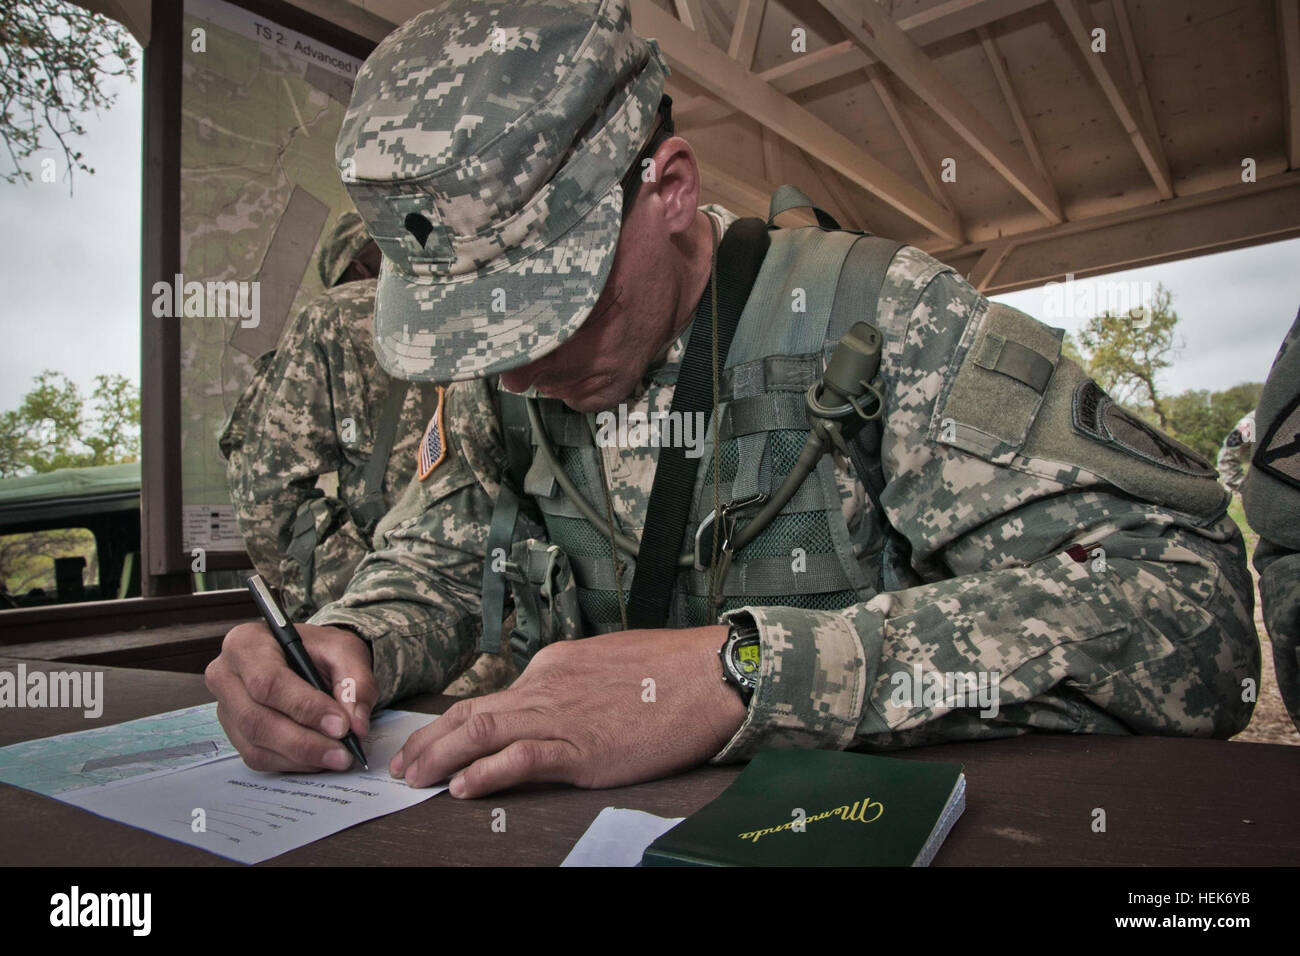 Spc. Jorge L.  Diaz, 402nd Civil Affairs Battalion, plots his points during the land navigation portion of the 350th Civil Affairs Command Best Warrior Competition at Camp Bullis, Texas on March 24, 2012. Diaz is from Vega Baja, Puerto Rico and is an information technician with the 402nd in Fort Buchanan, Puerto Rico. (U.S. Army photo by Staff Sgt. Felix R. Fimbres) 350th CACOM battles it out by the Alamo 120324-A-CK868-960 Stock Photo